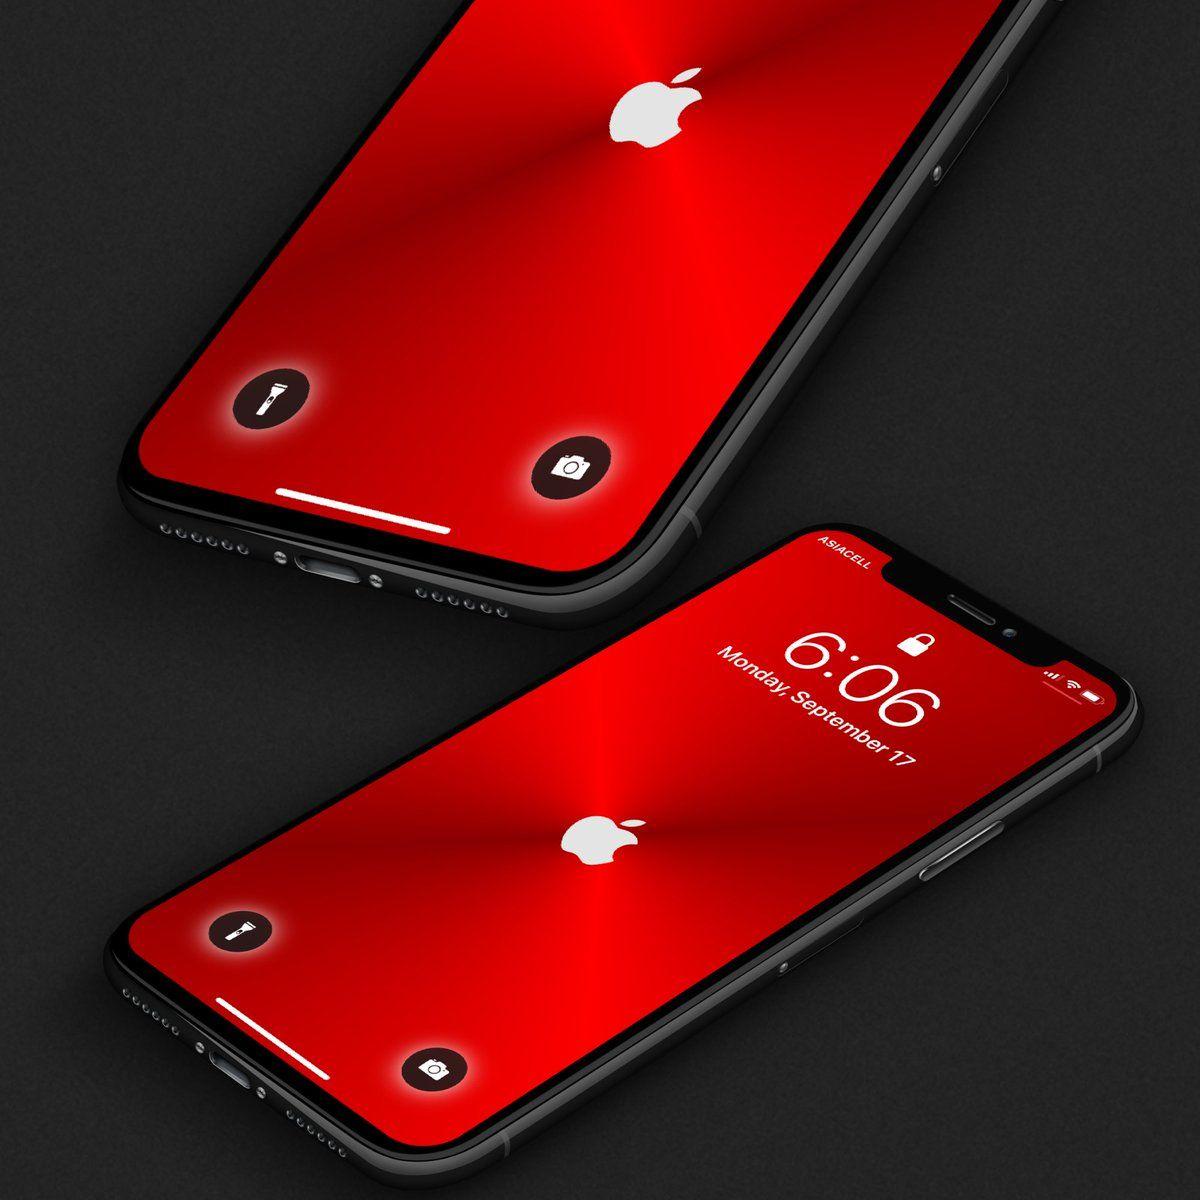 Red Apple Logo - ˇ෴ˇ ) new red apple logo wallpaper available